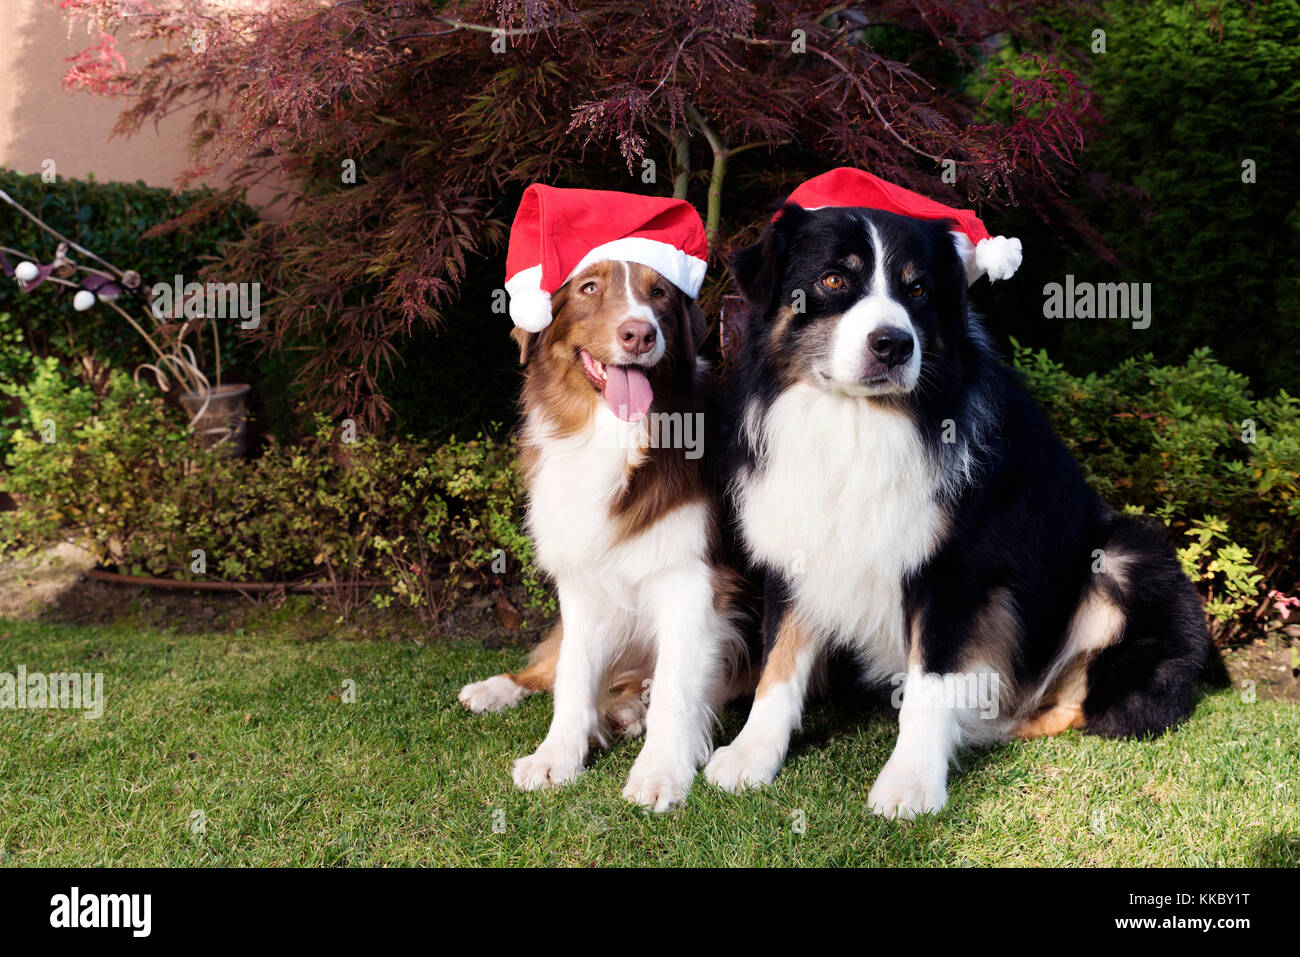 Merry Christmas and Happy New Year Stock Photo